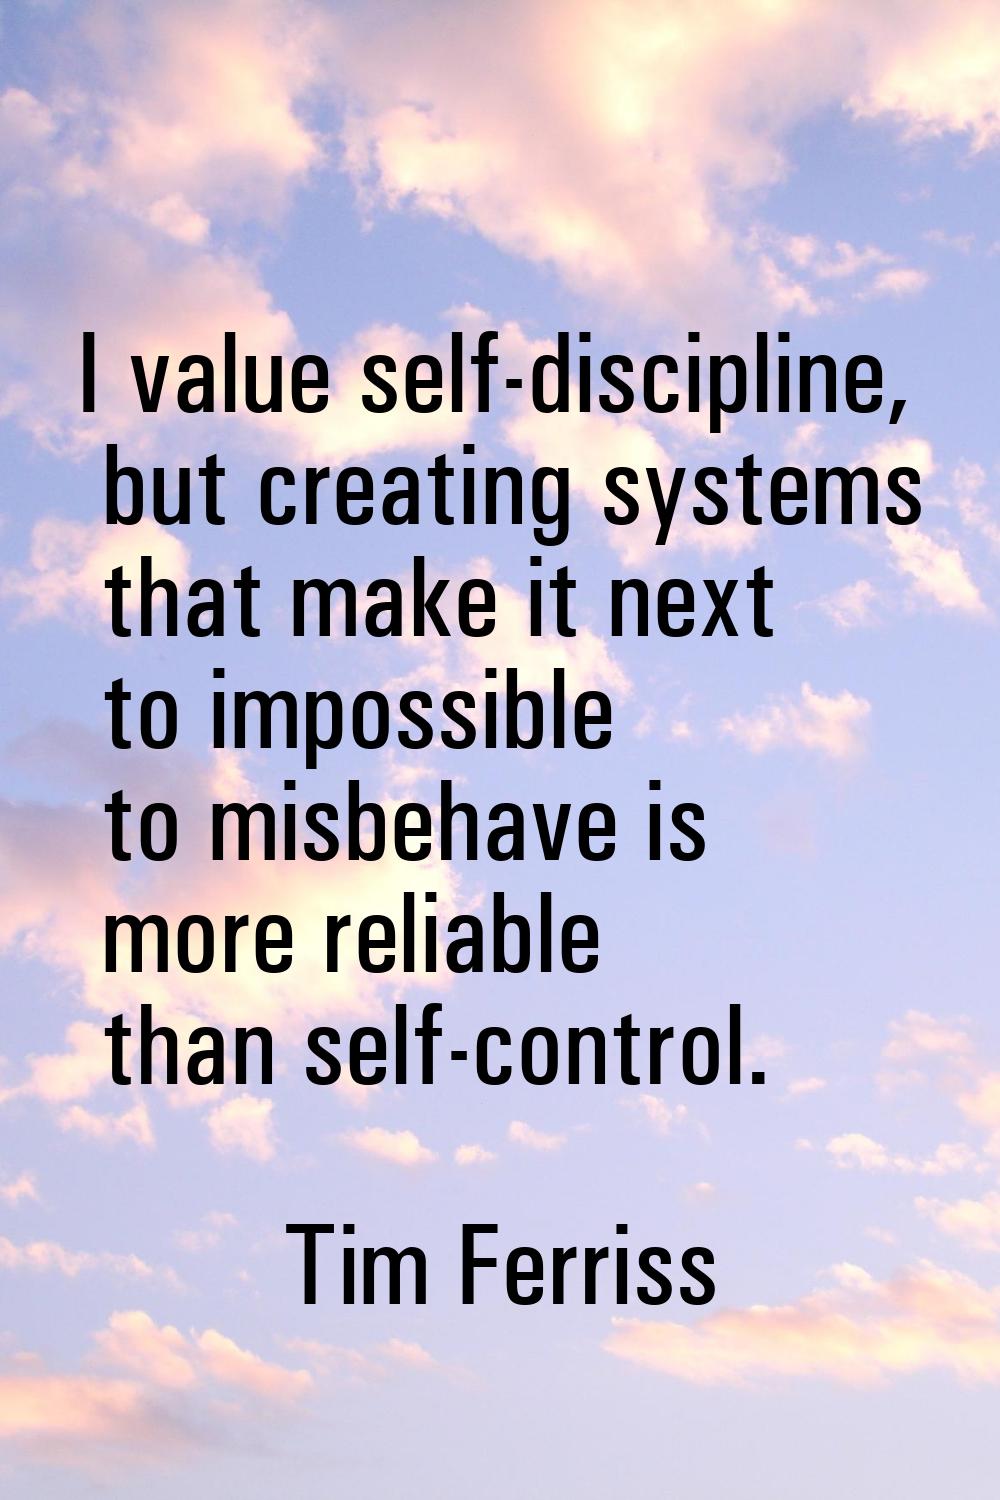 I value self-discipline, but creating systems that make it next to impossible to misbehave is more 